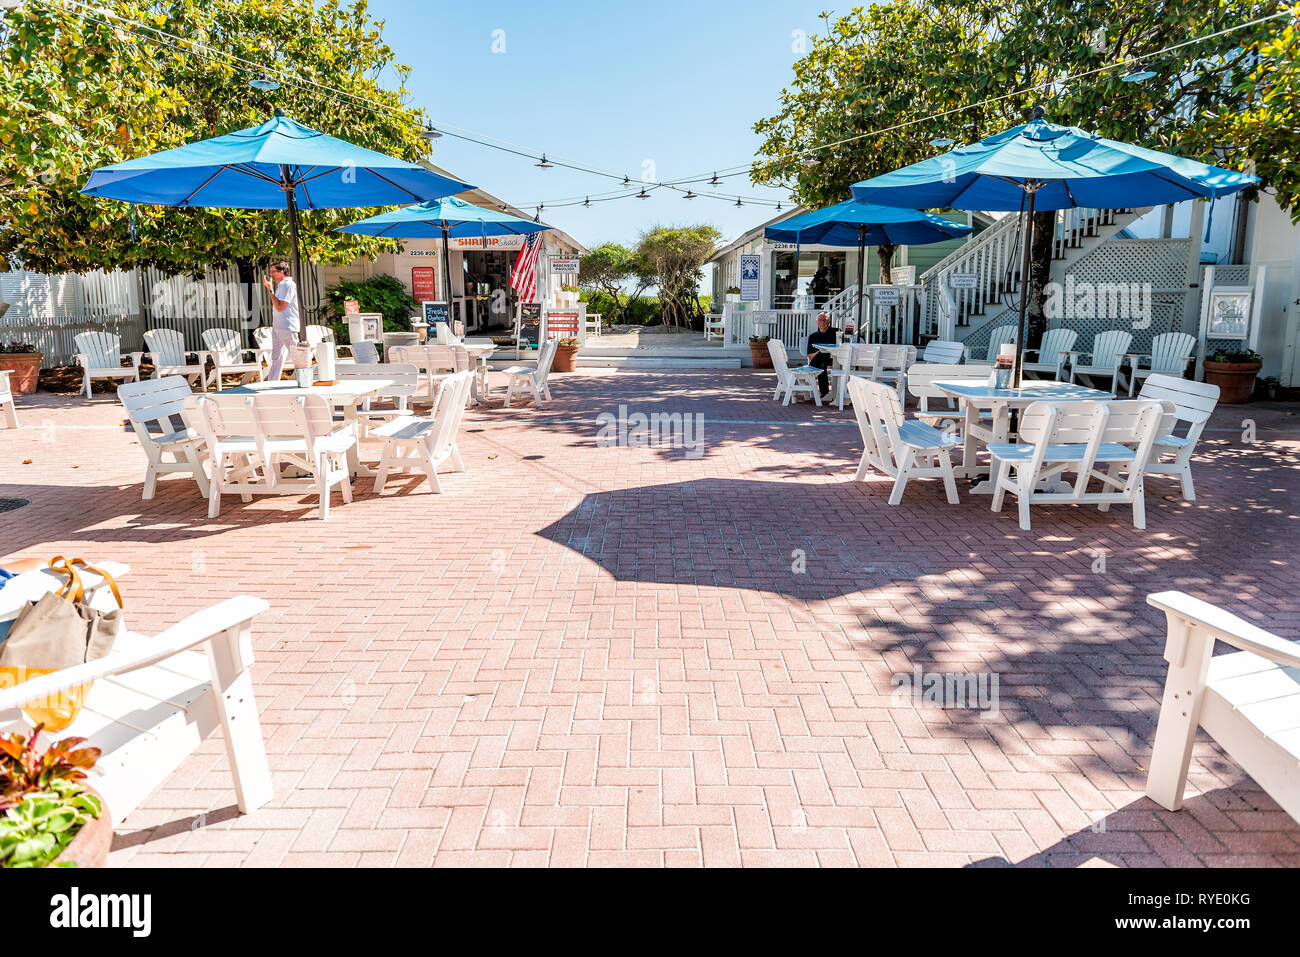 Seaside, USA - April 25, 2018: Park empty square center in historic city town beach village during sunny day in Florida panhandle gulf of mexico urban Stock Photo